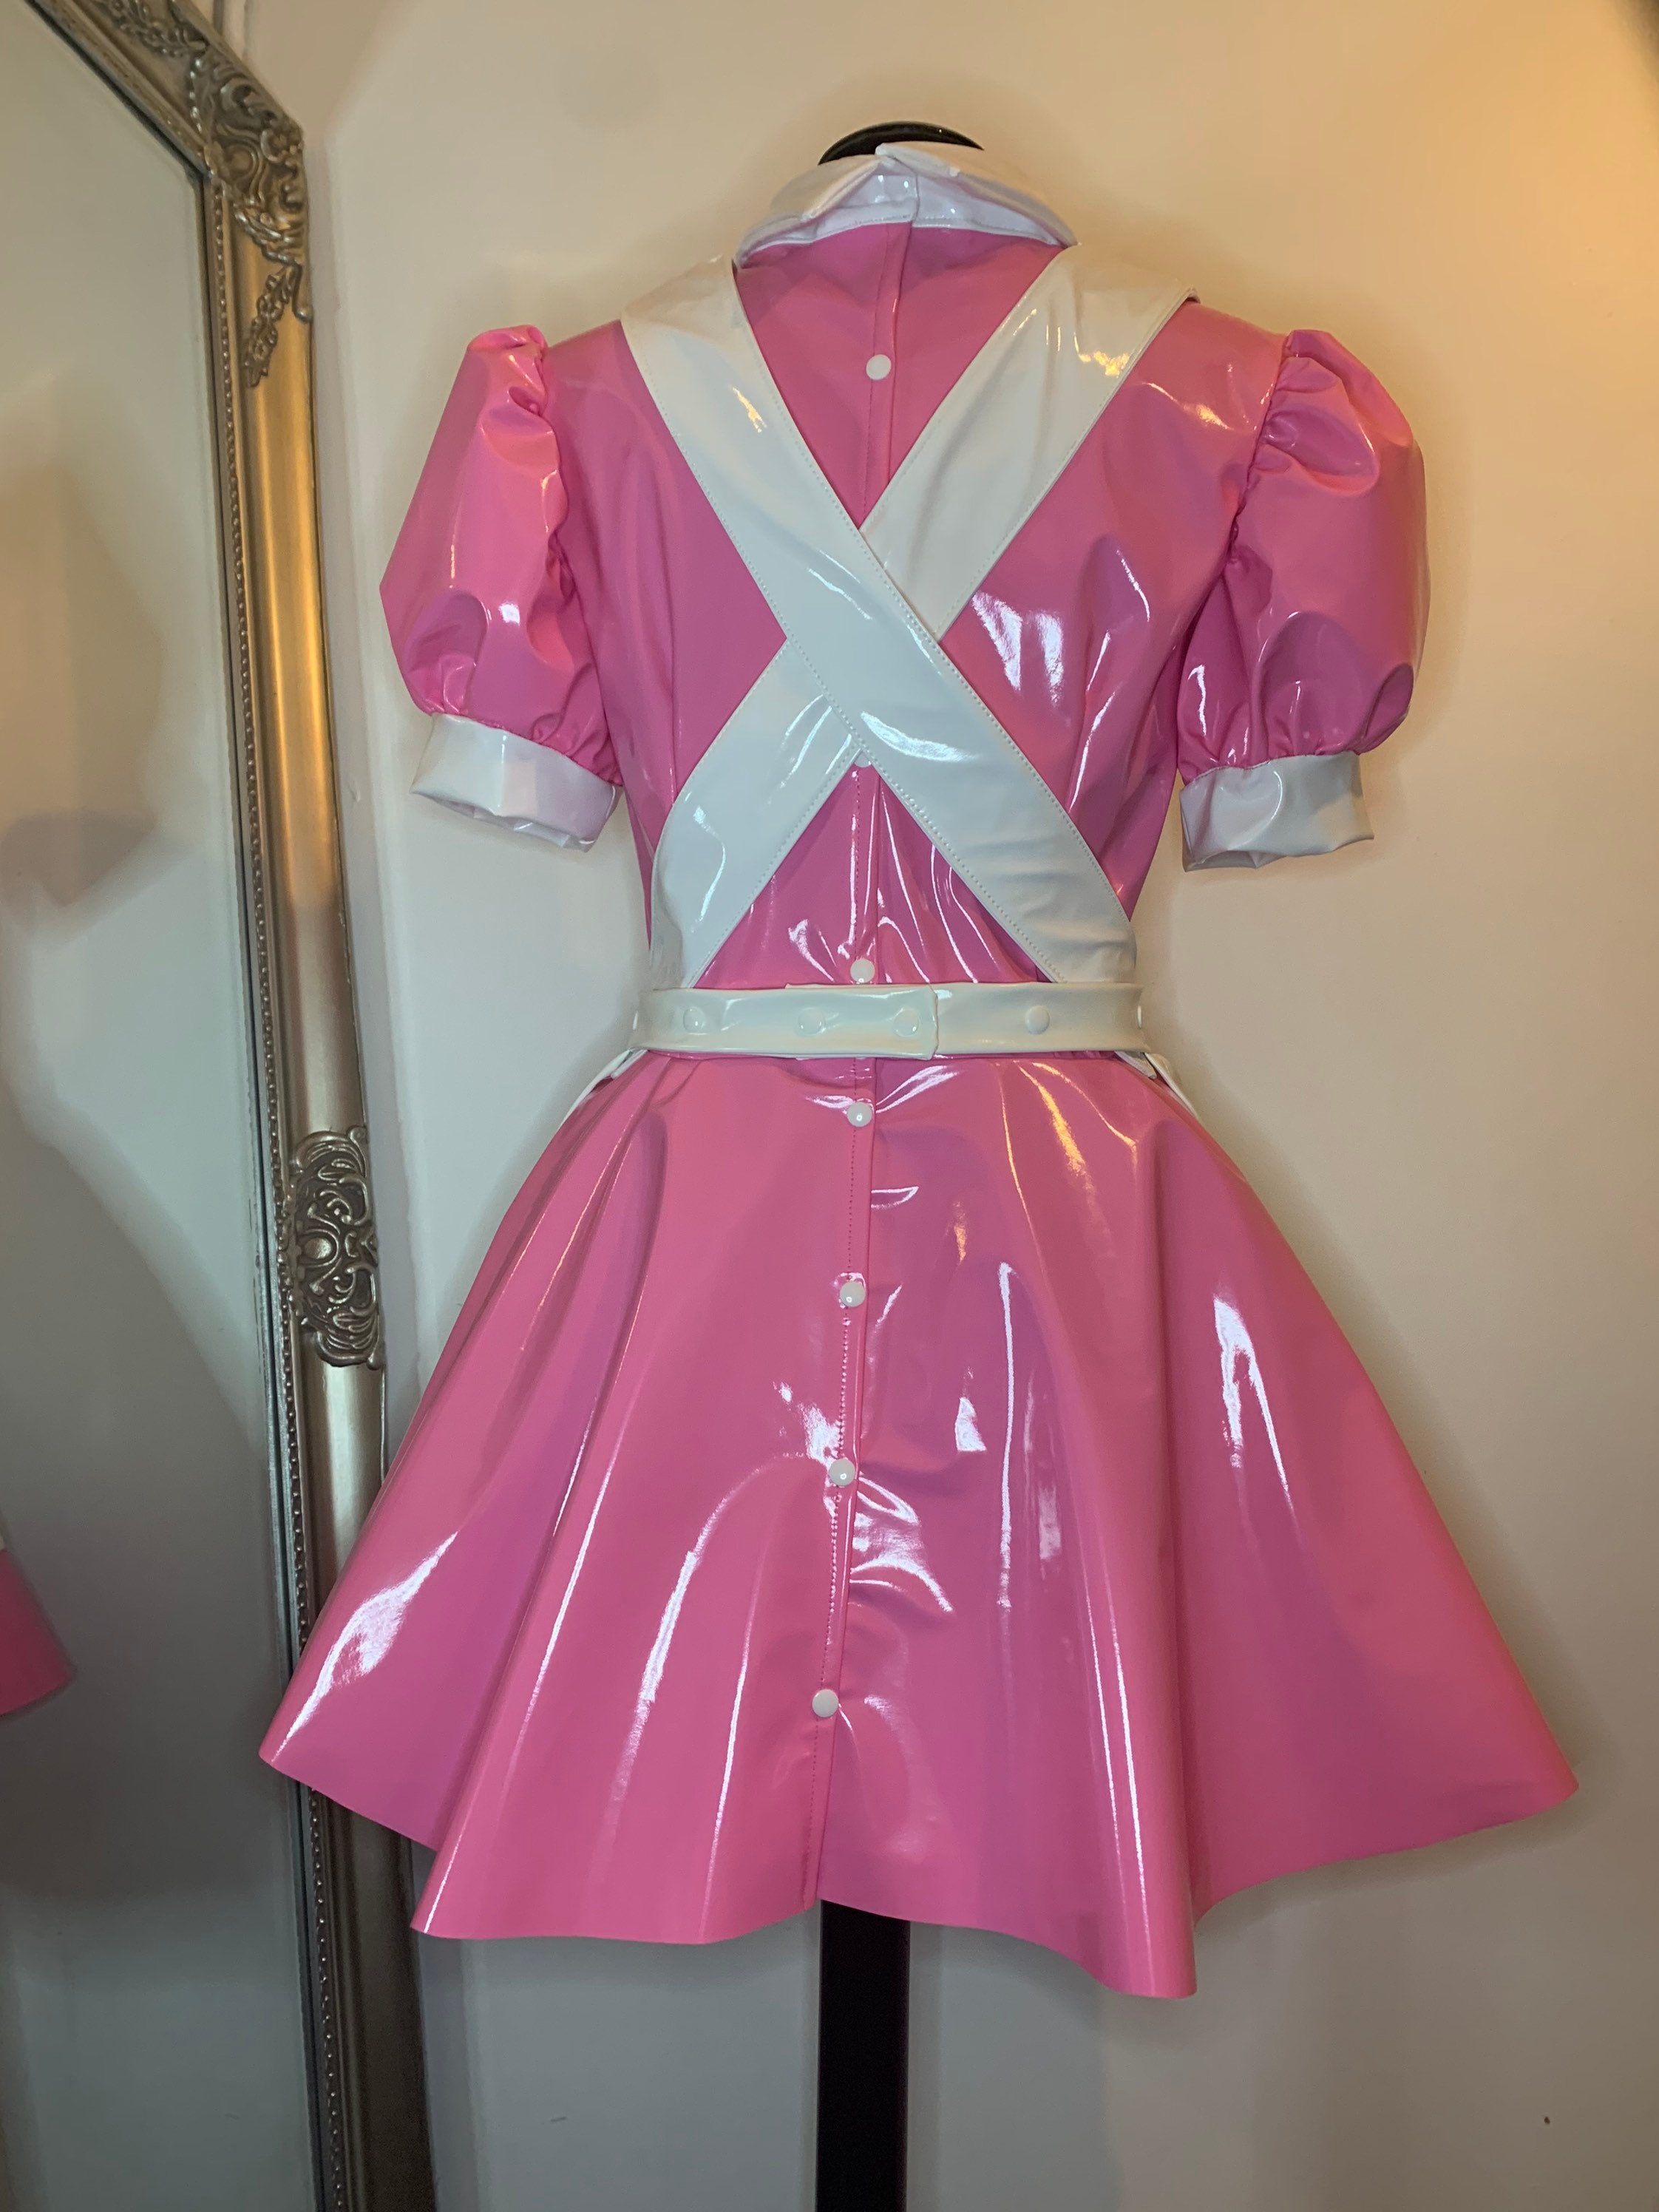 PVC Maids Uniform With Detachable Apron and Contrasting Netted - Etsy